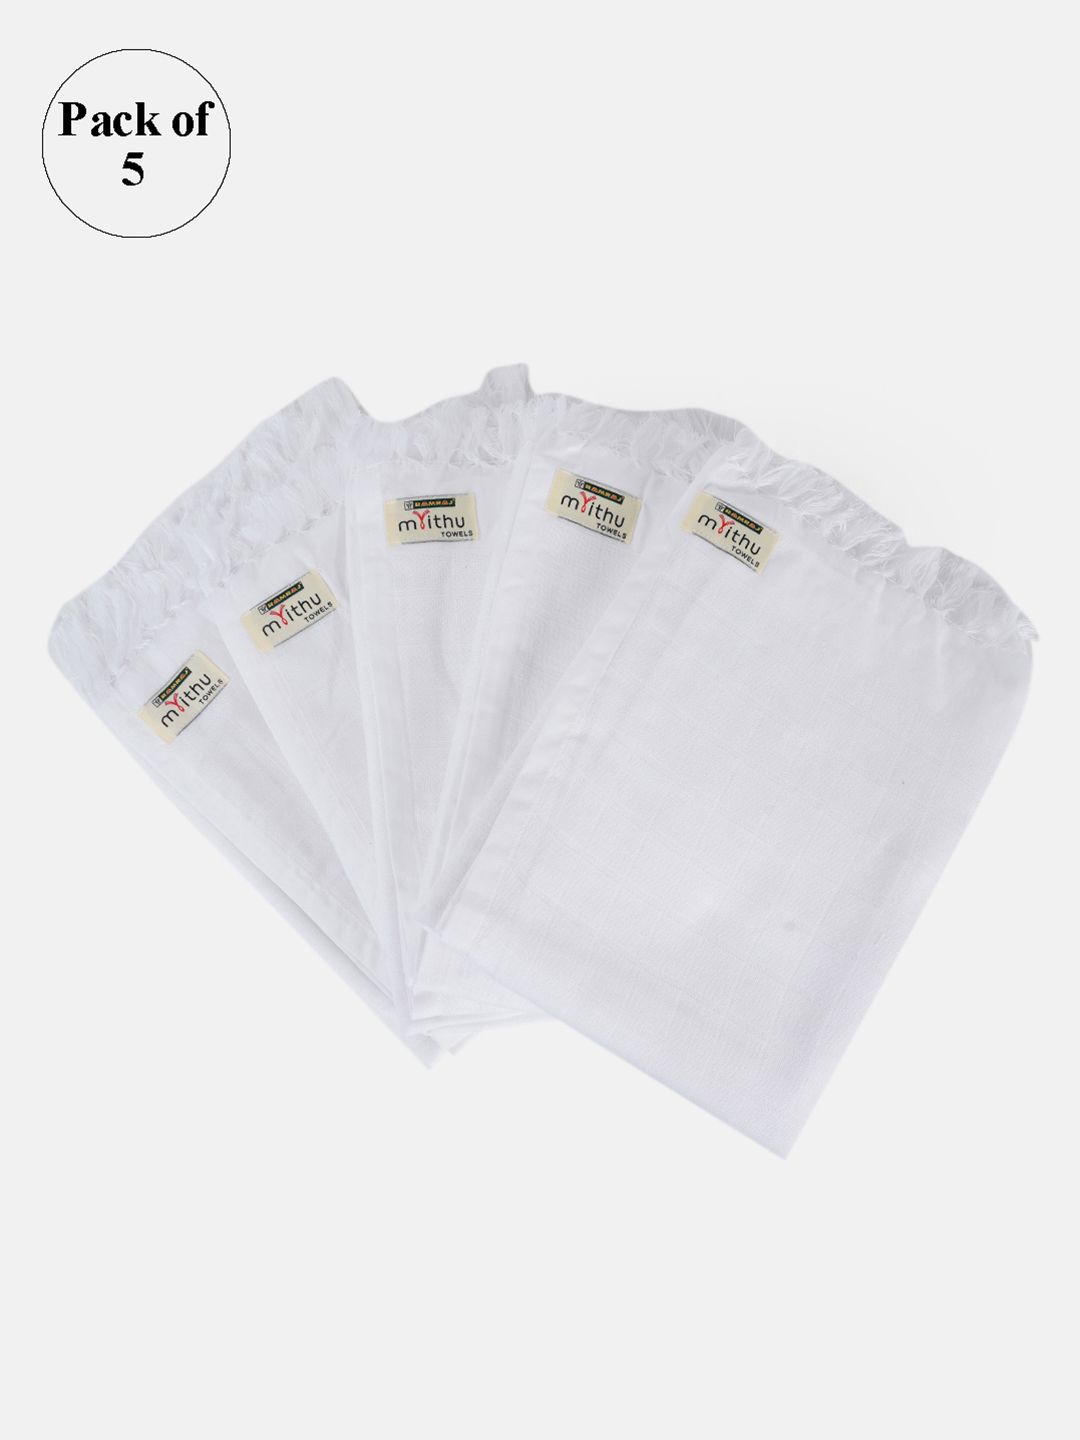 Ramraj Pack Of 5 White Solid Cotton Bath Towel Price in India